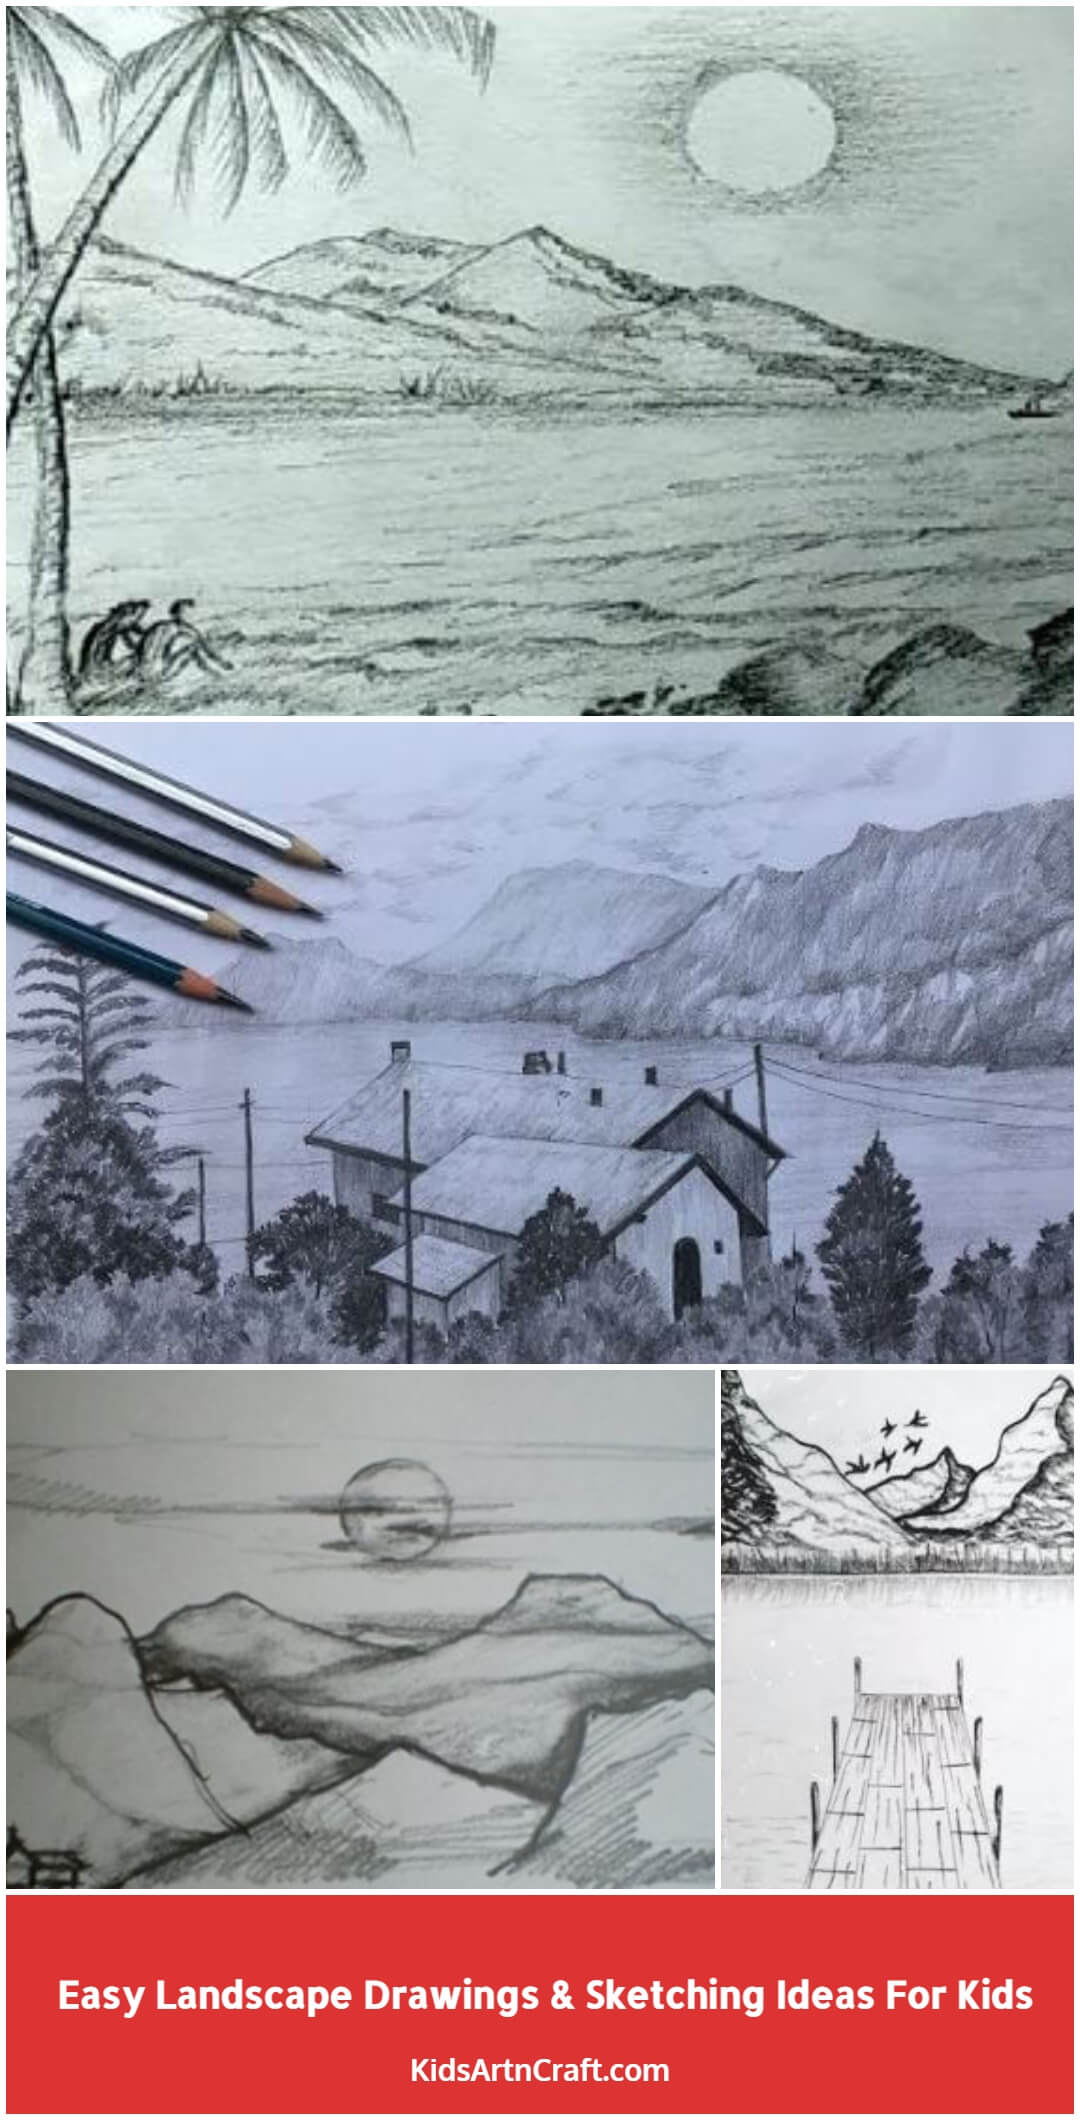 Pencil Drawing Services - Masterful Artistry for Visualization